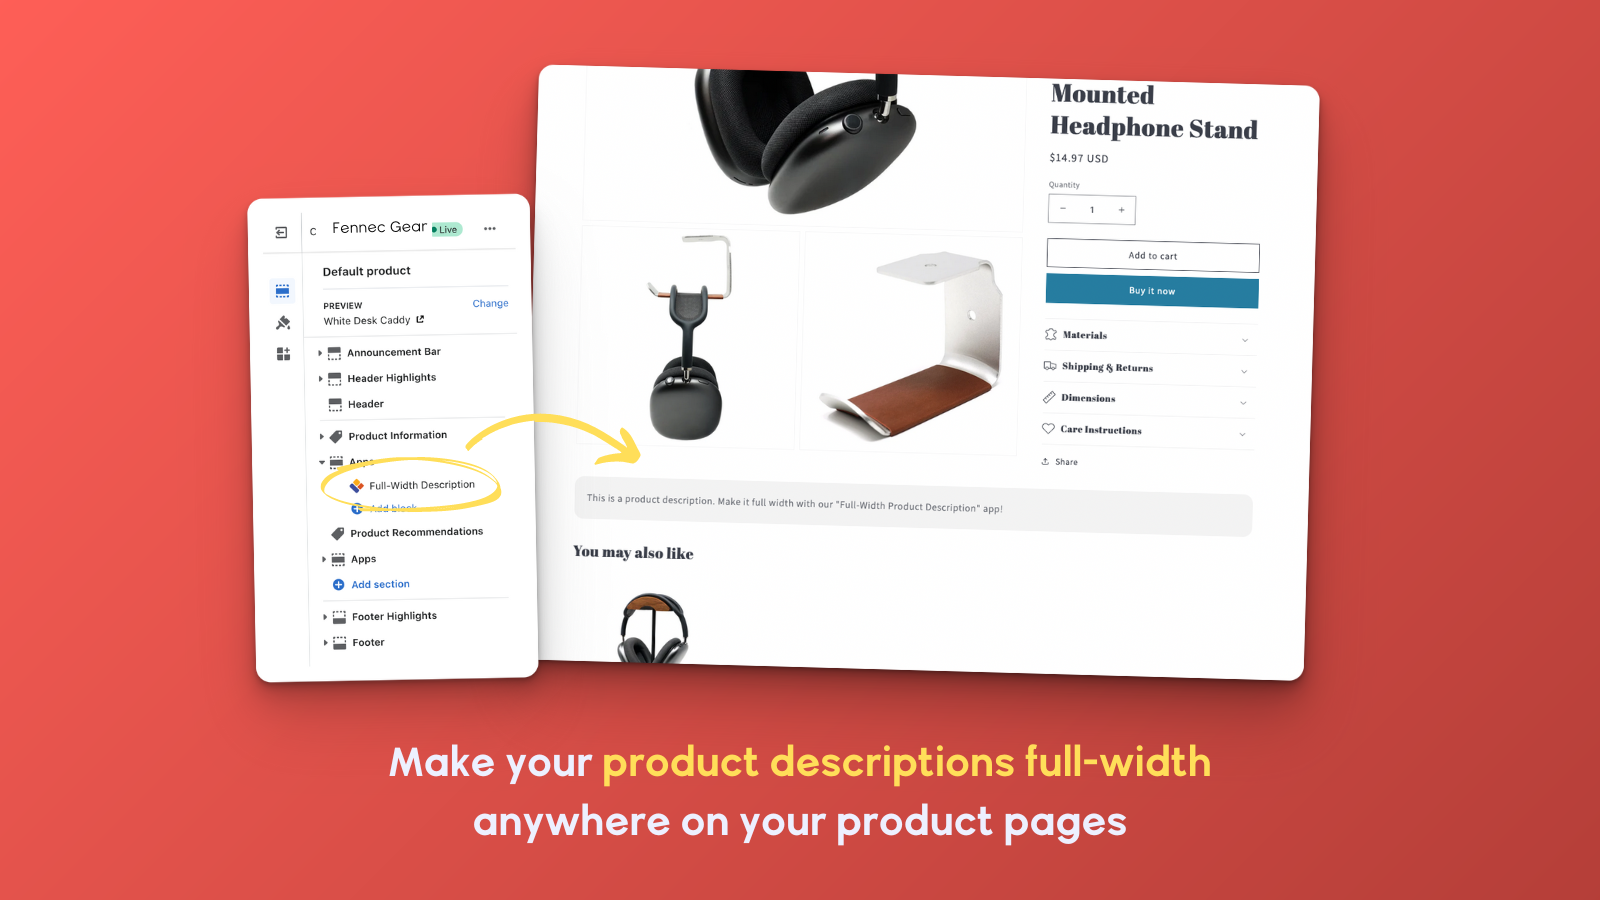 Make your product descriptions full-width anywhere on the page.